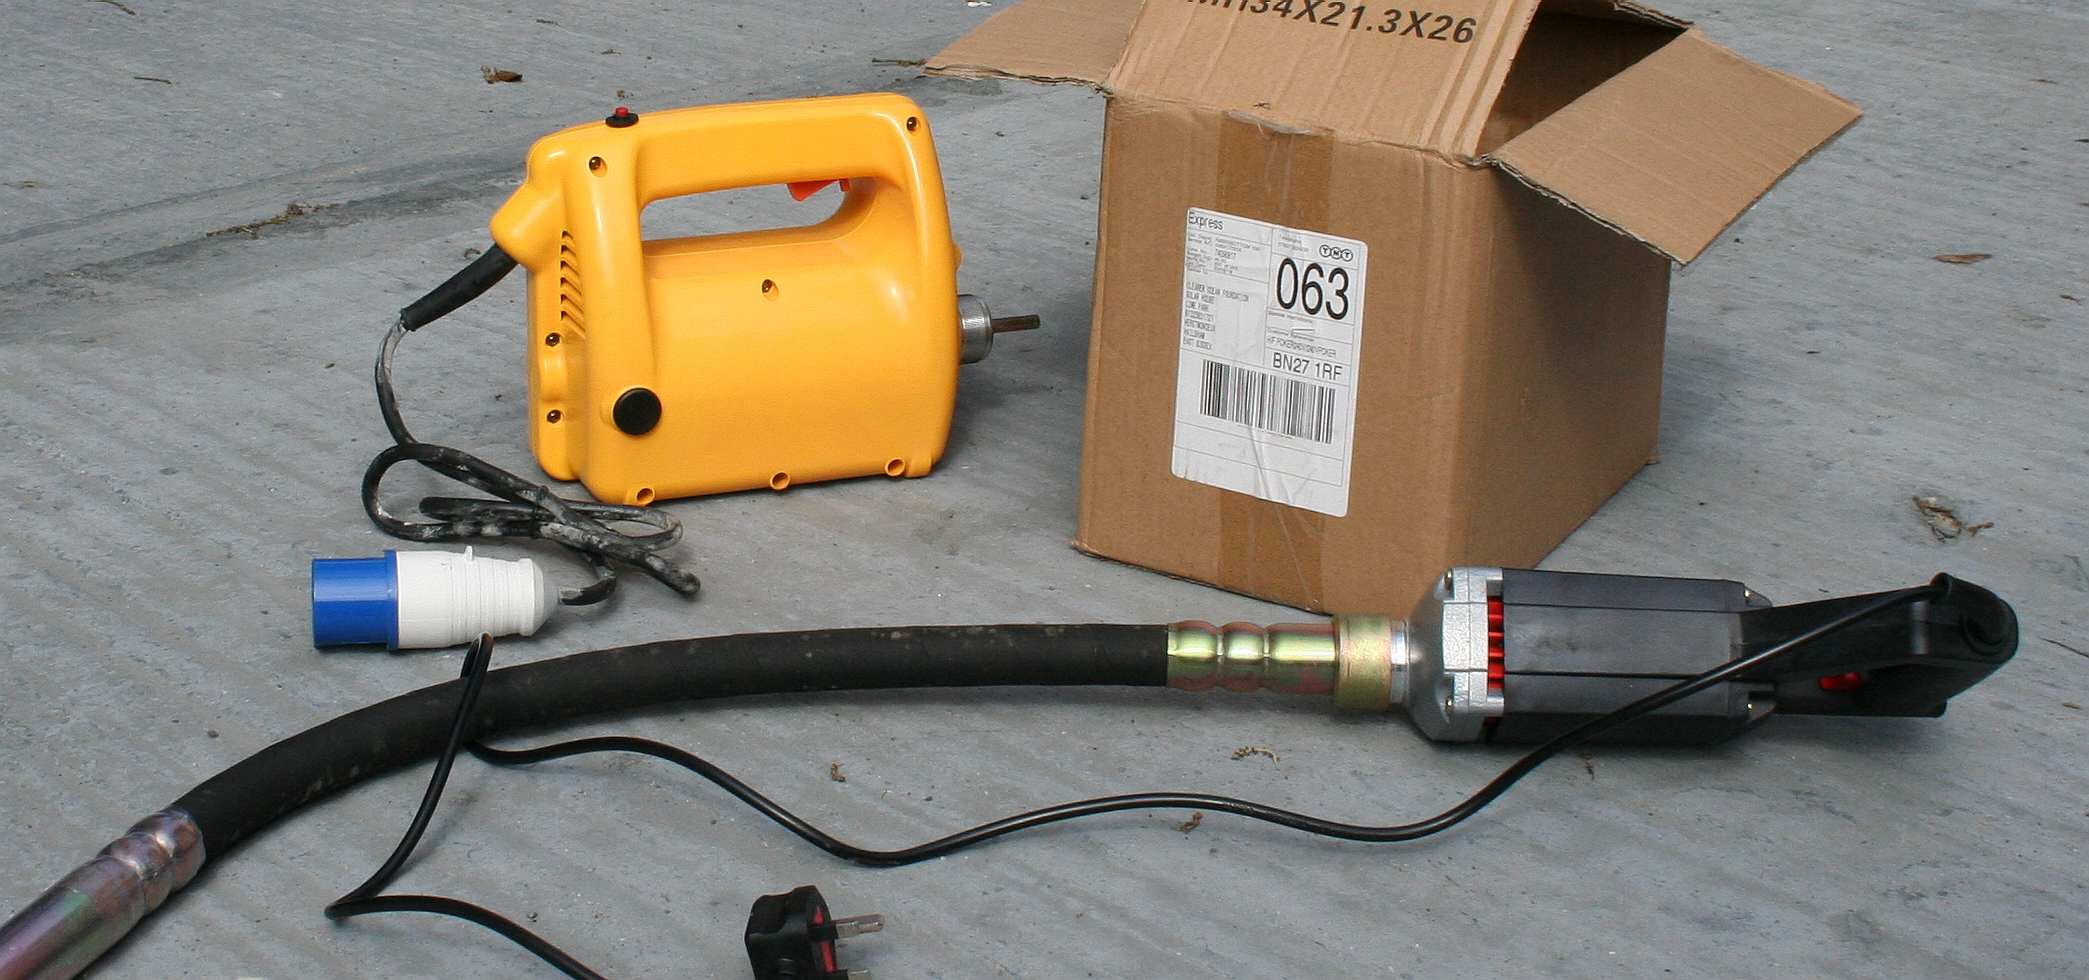 Chris Bury sales concrete vibrator without the hose and head